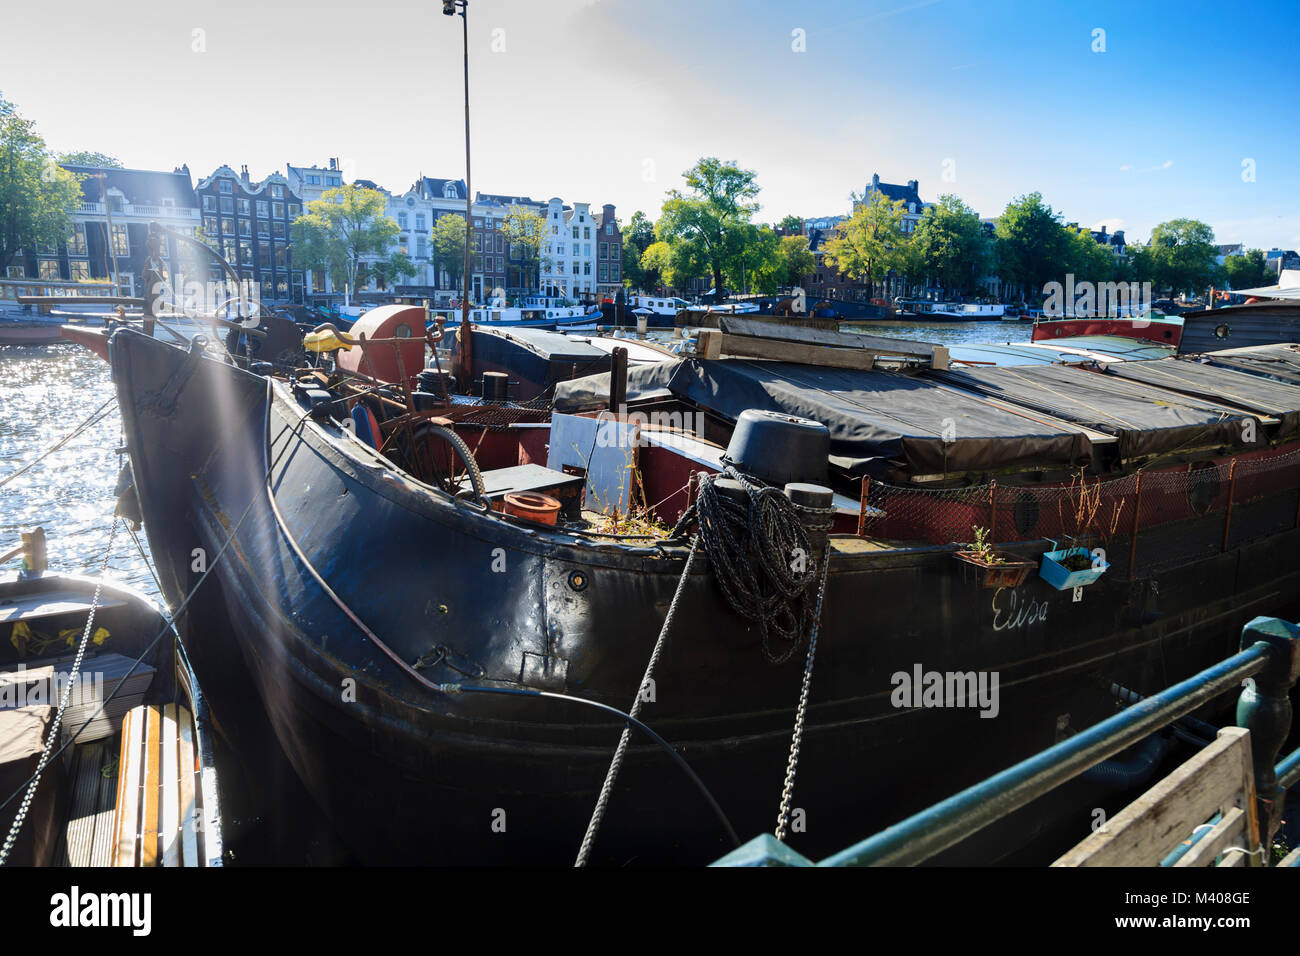 The Elisa, a barge moored on the Amstel in Amsterdam Stock Photo